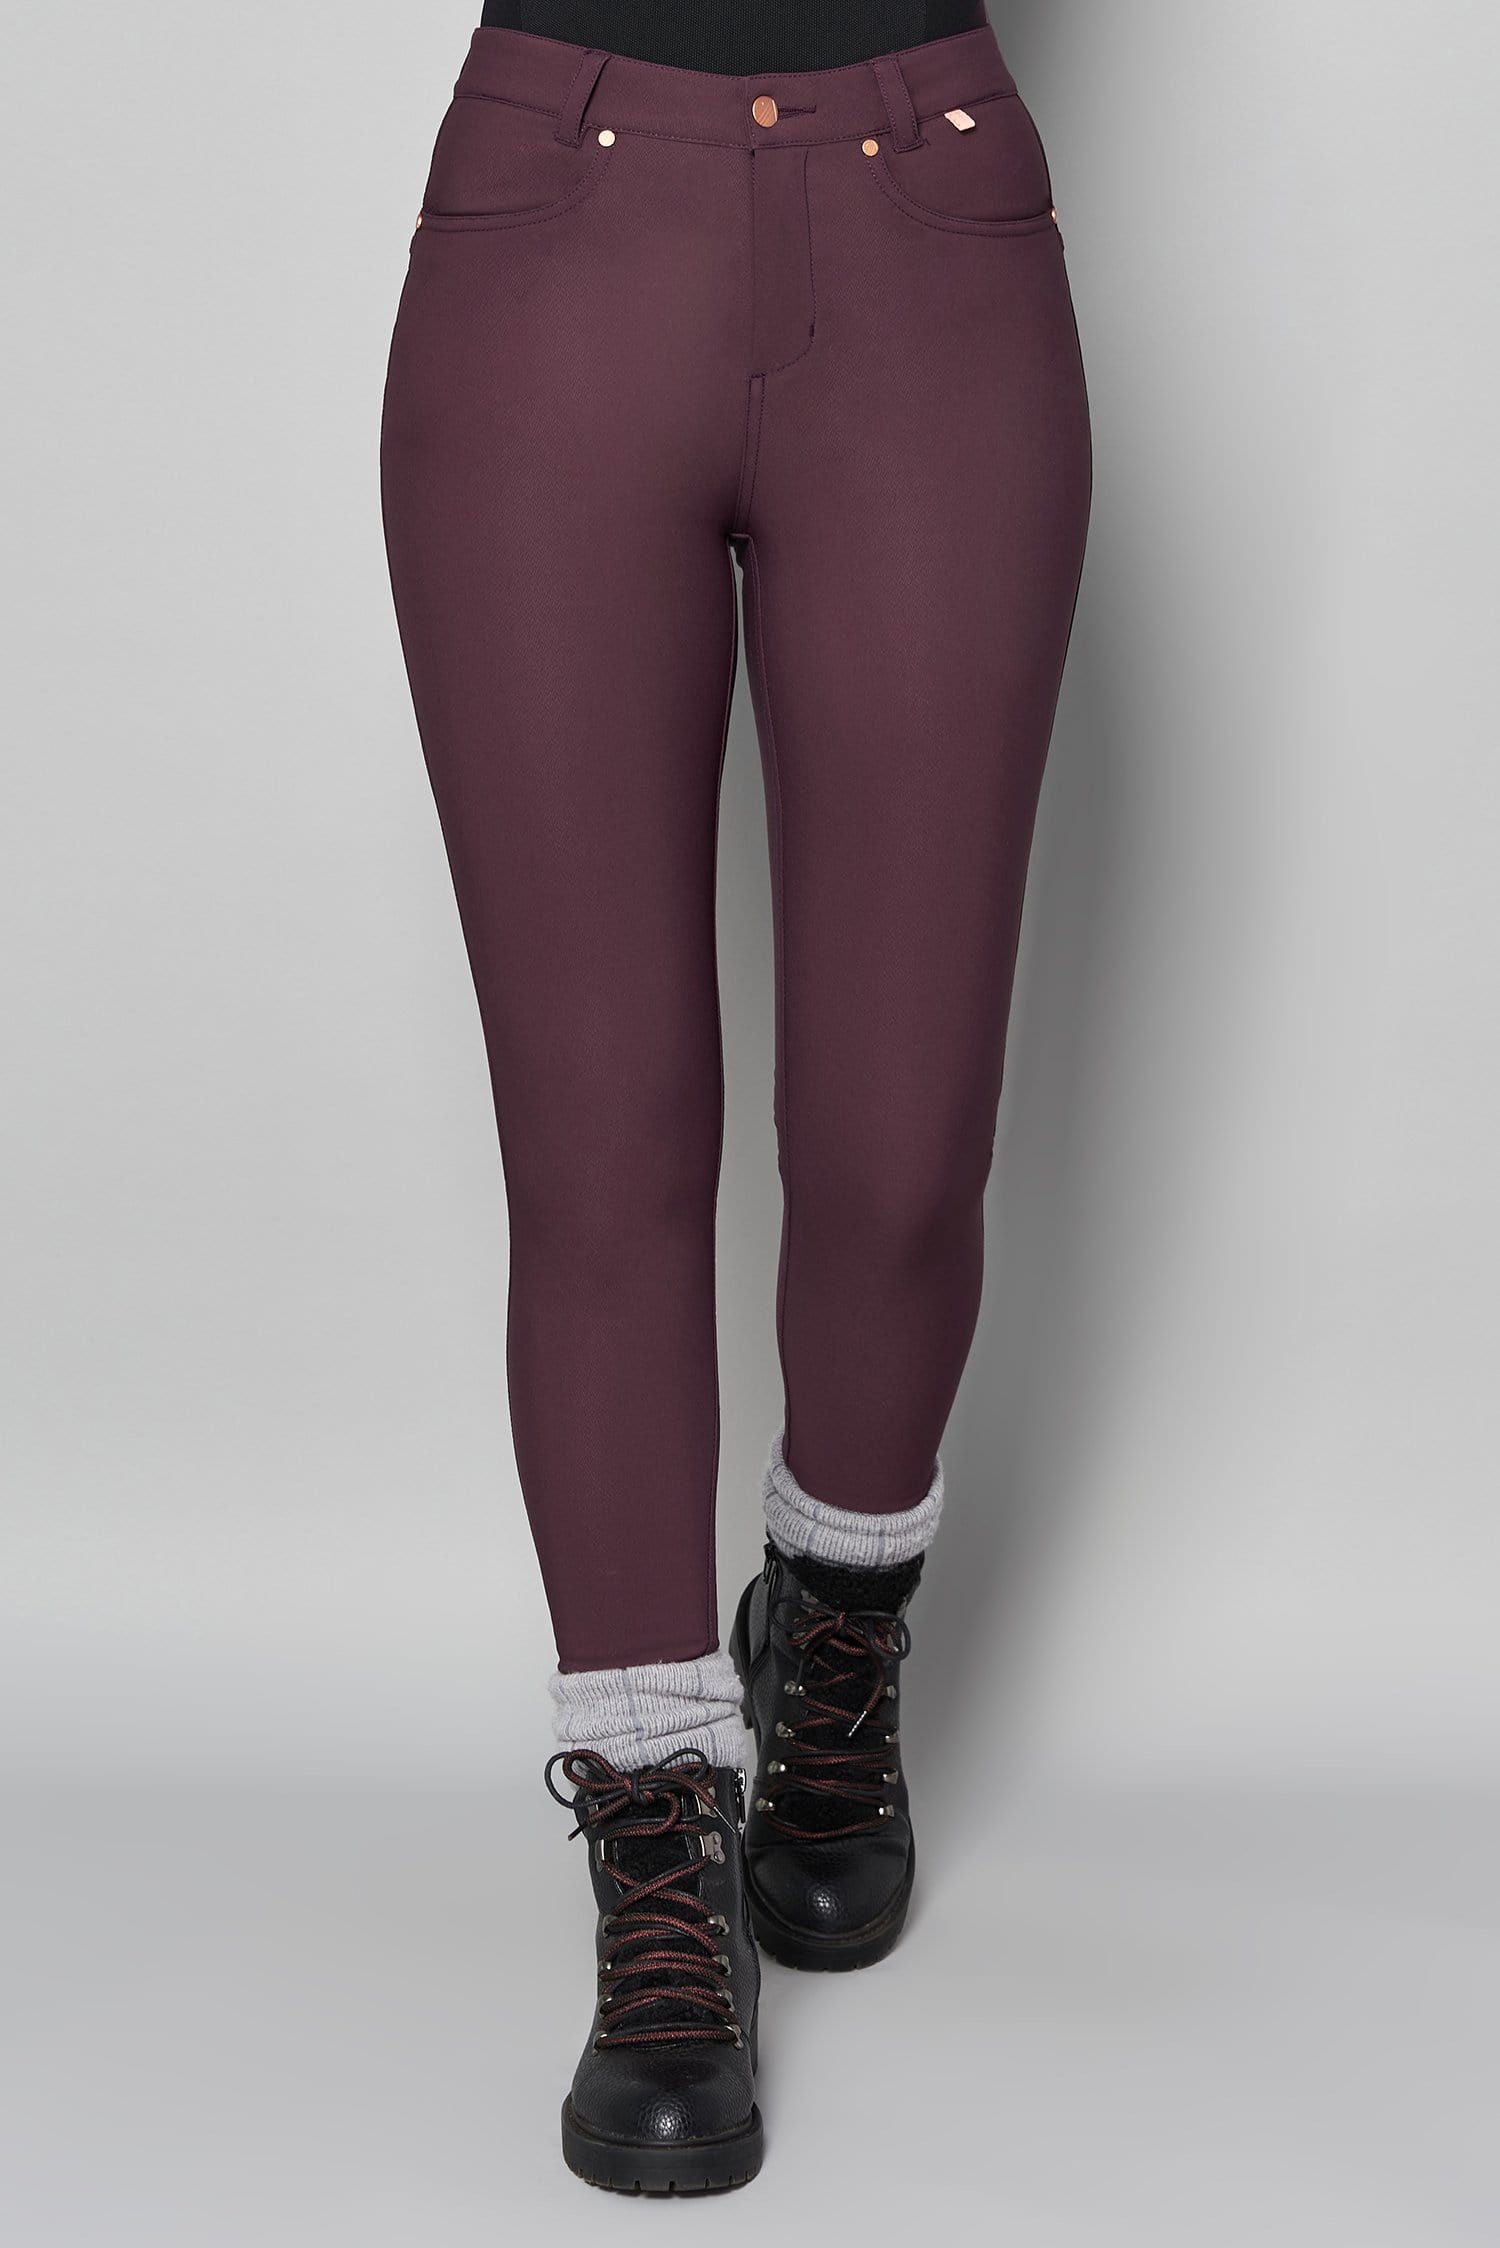 Thermal Skinny Outdoor Trousers - Aubergine - 32p / Uk14 - Womens - Acai Outdoorwear